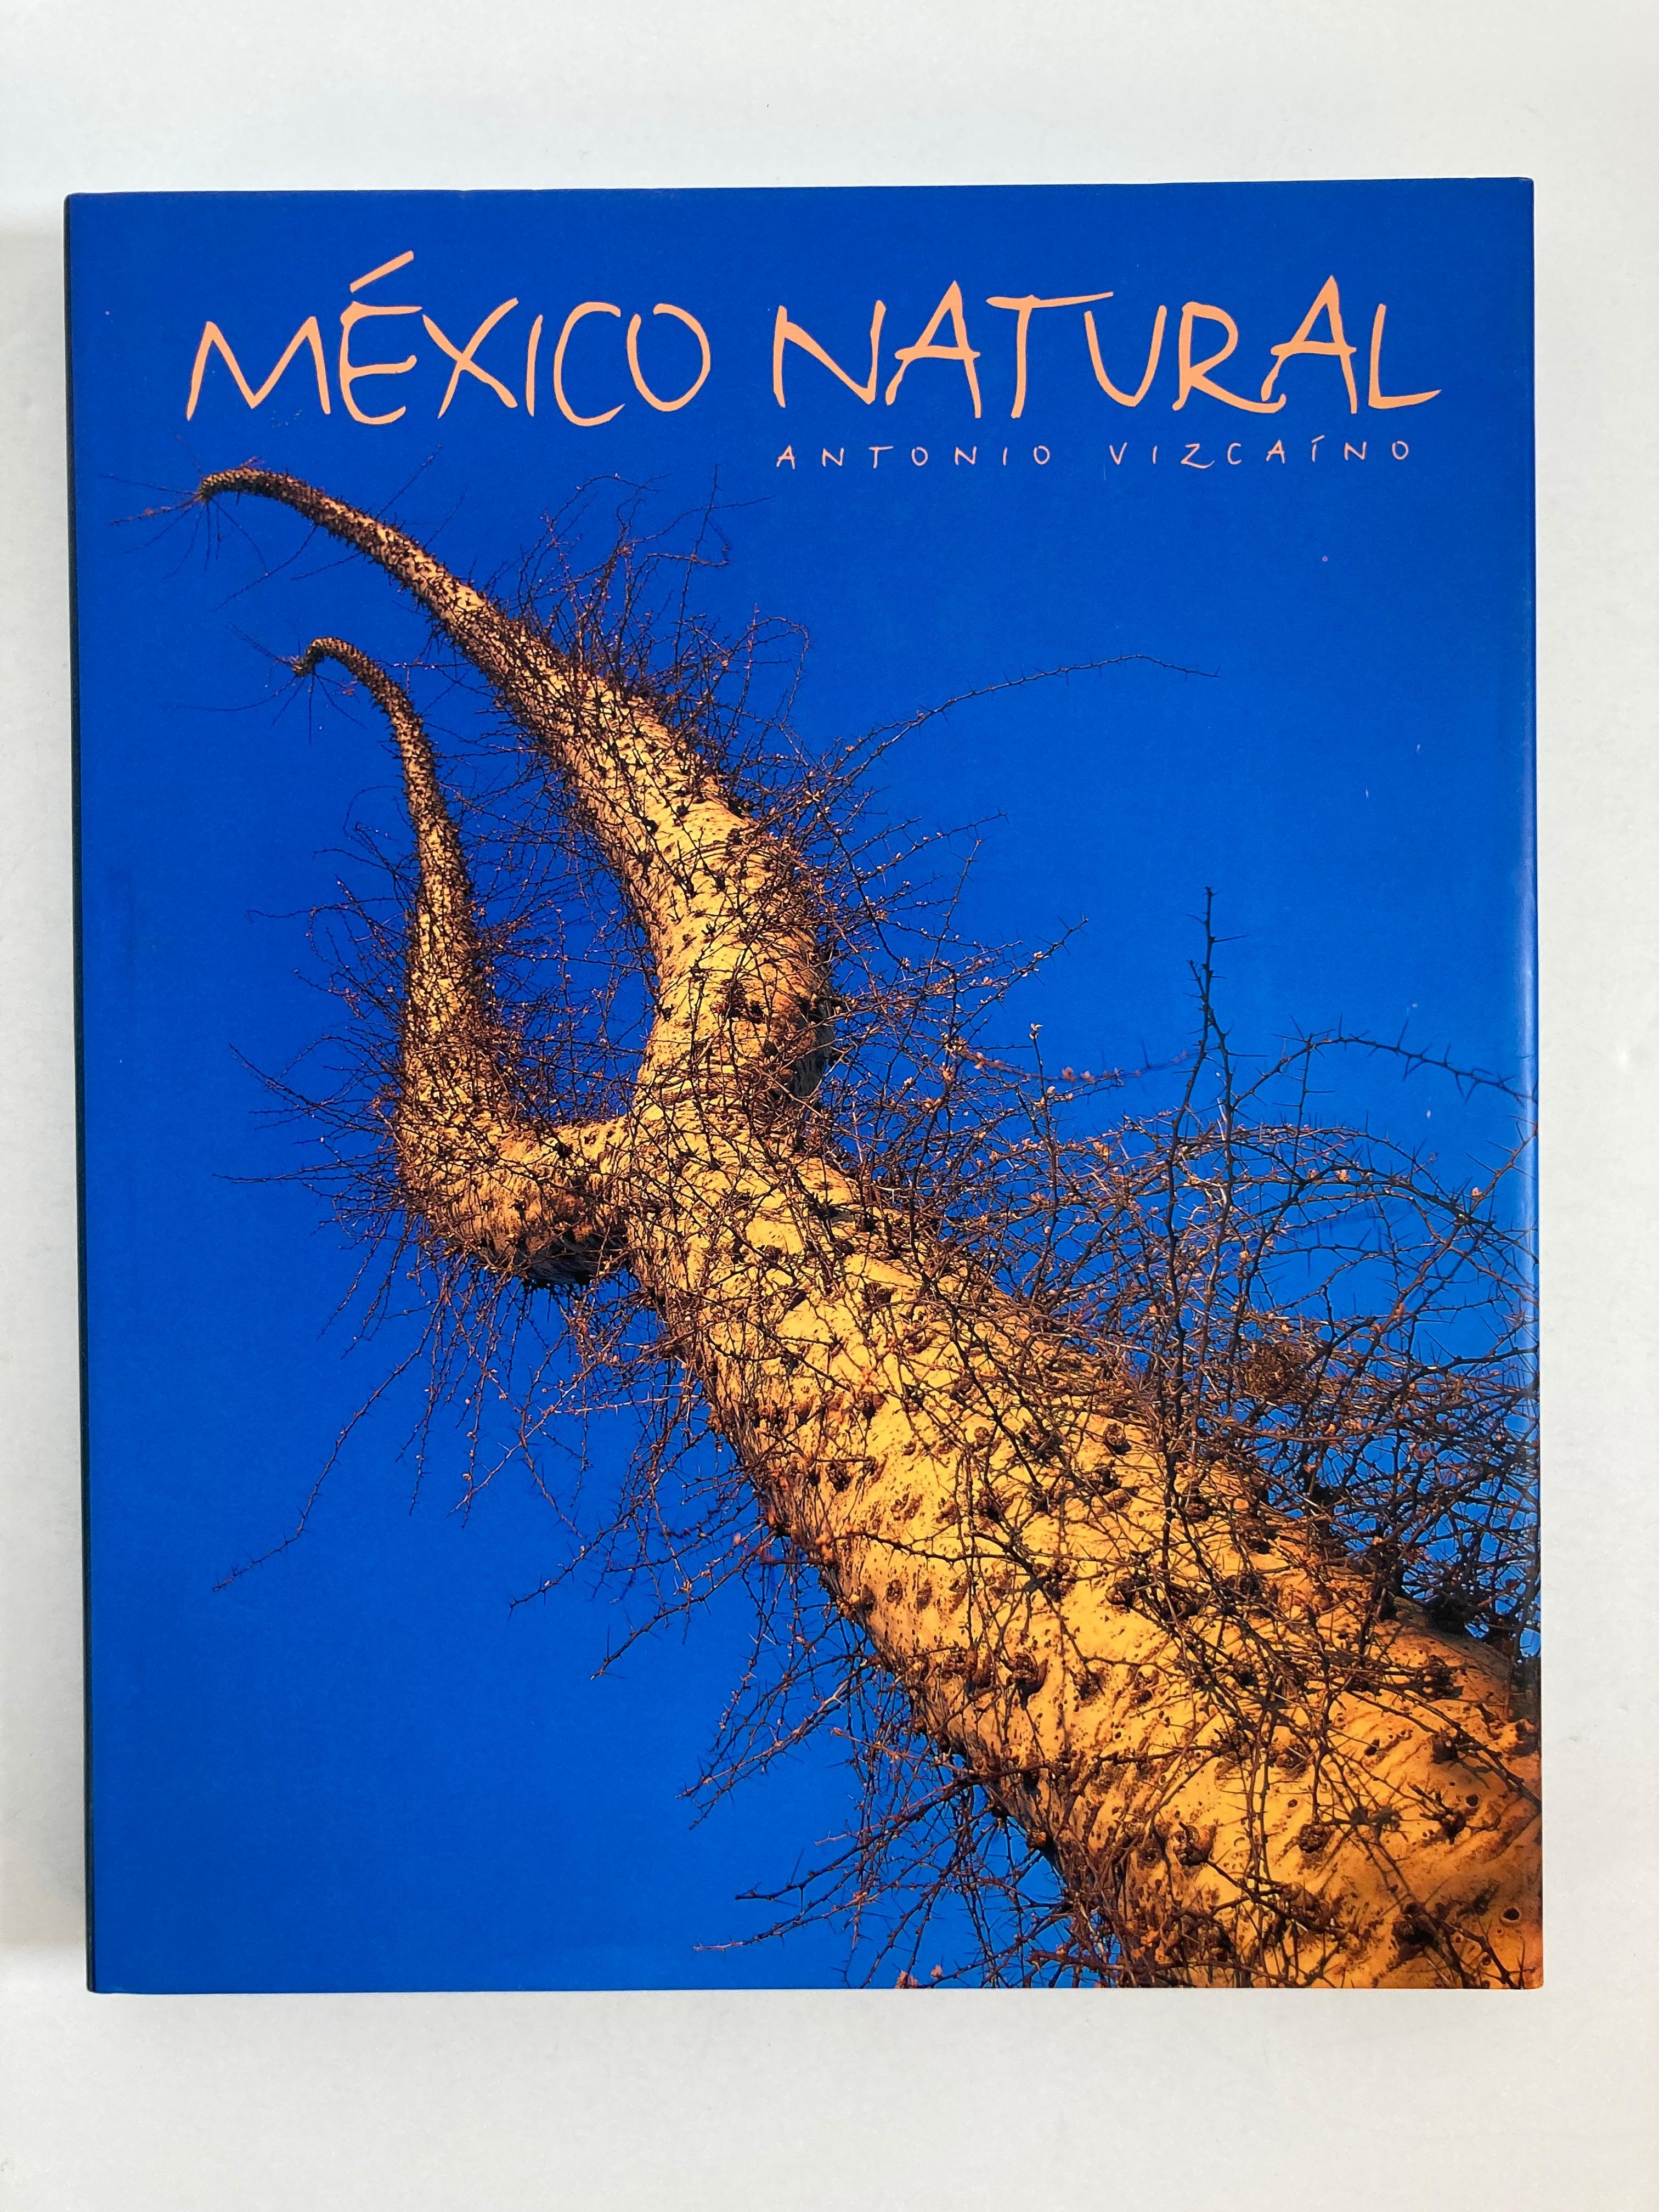 Antonio Vizcaino - Mexico Natural/
Fabulous photographies in Mexico by Antonio Vizcaino (Photographer)
Landscape photography is the link between nature and our emotions : Antonio Vizcaíno.
Antonio Vizcaino, was a mexican landscape photographer,